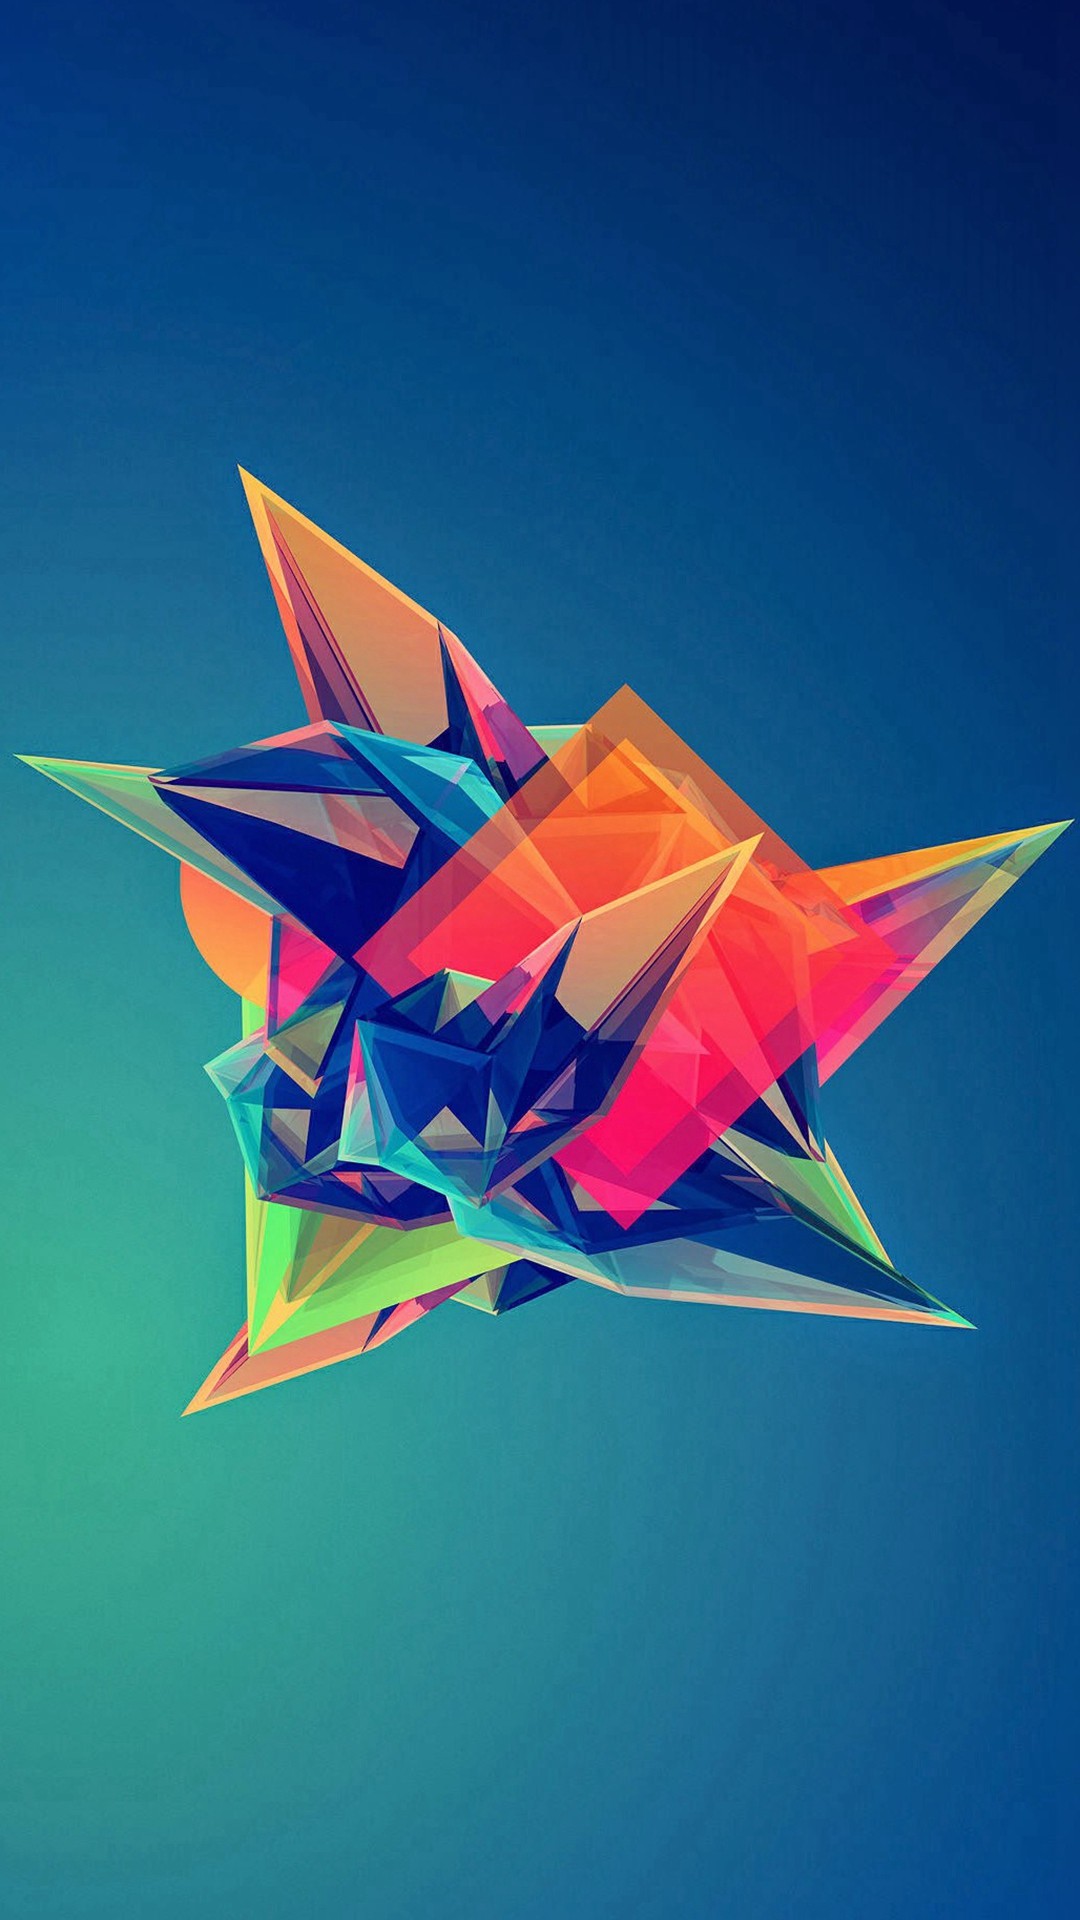 1080x1920 Colorful Cool Abstract Polygonal Shape #iPhone #7 #wallpaper